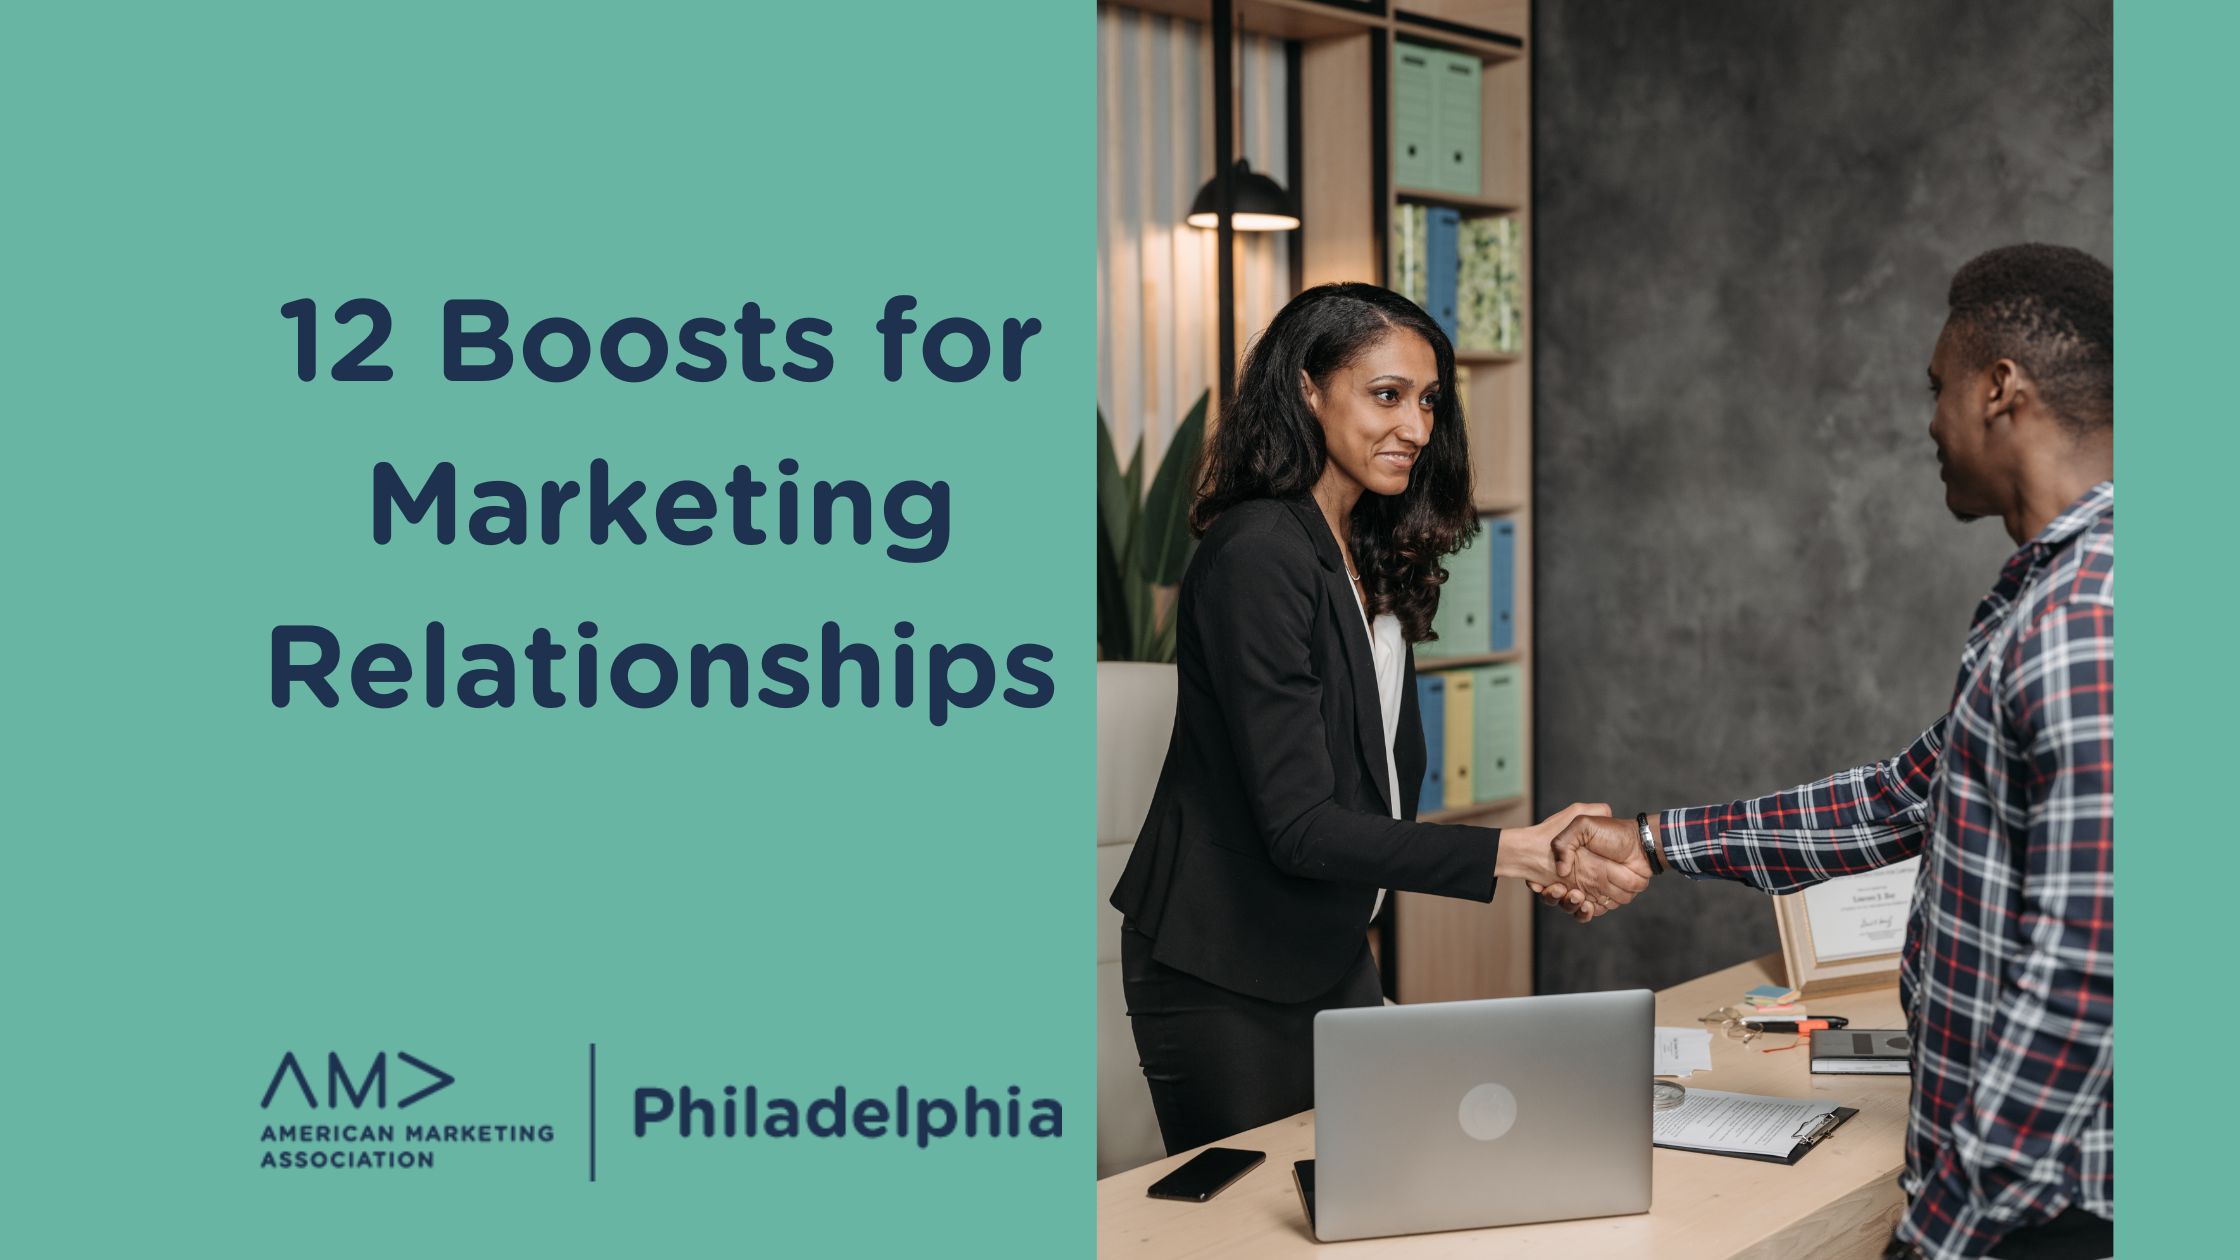 12 Boosts for Marketing Relationships